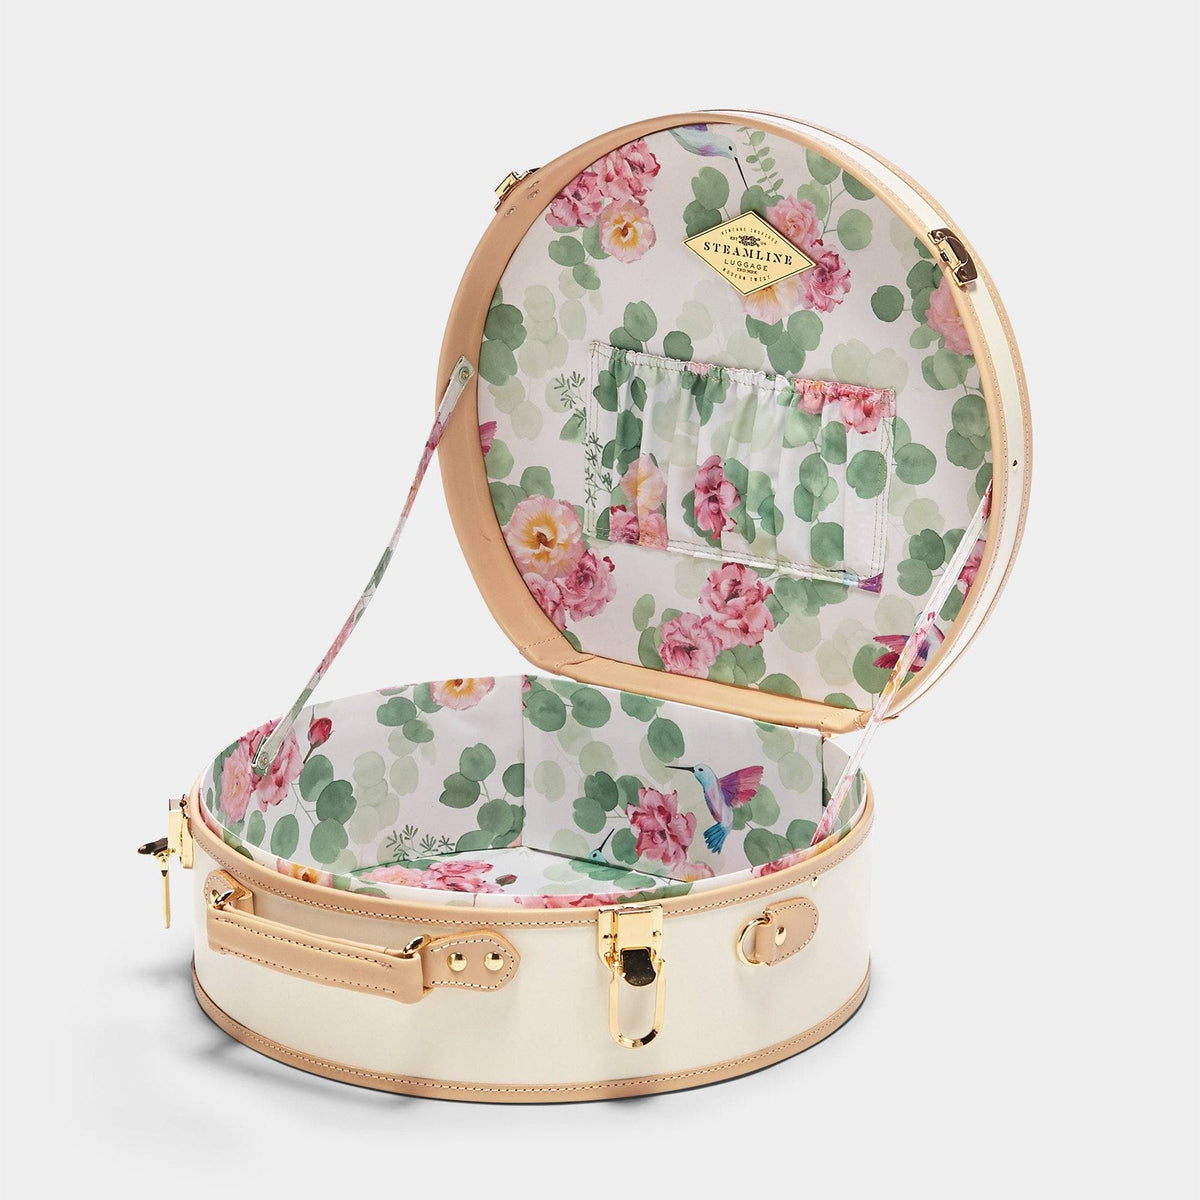 The Sweetheart - Hatbox Deluxe Hatbox Deluxe Steamline Luggage 